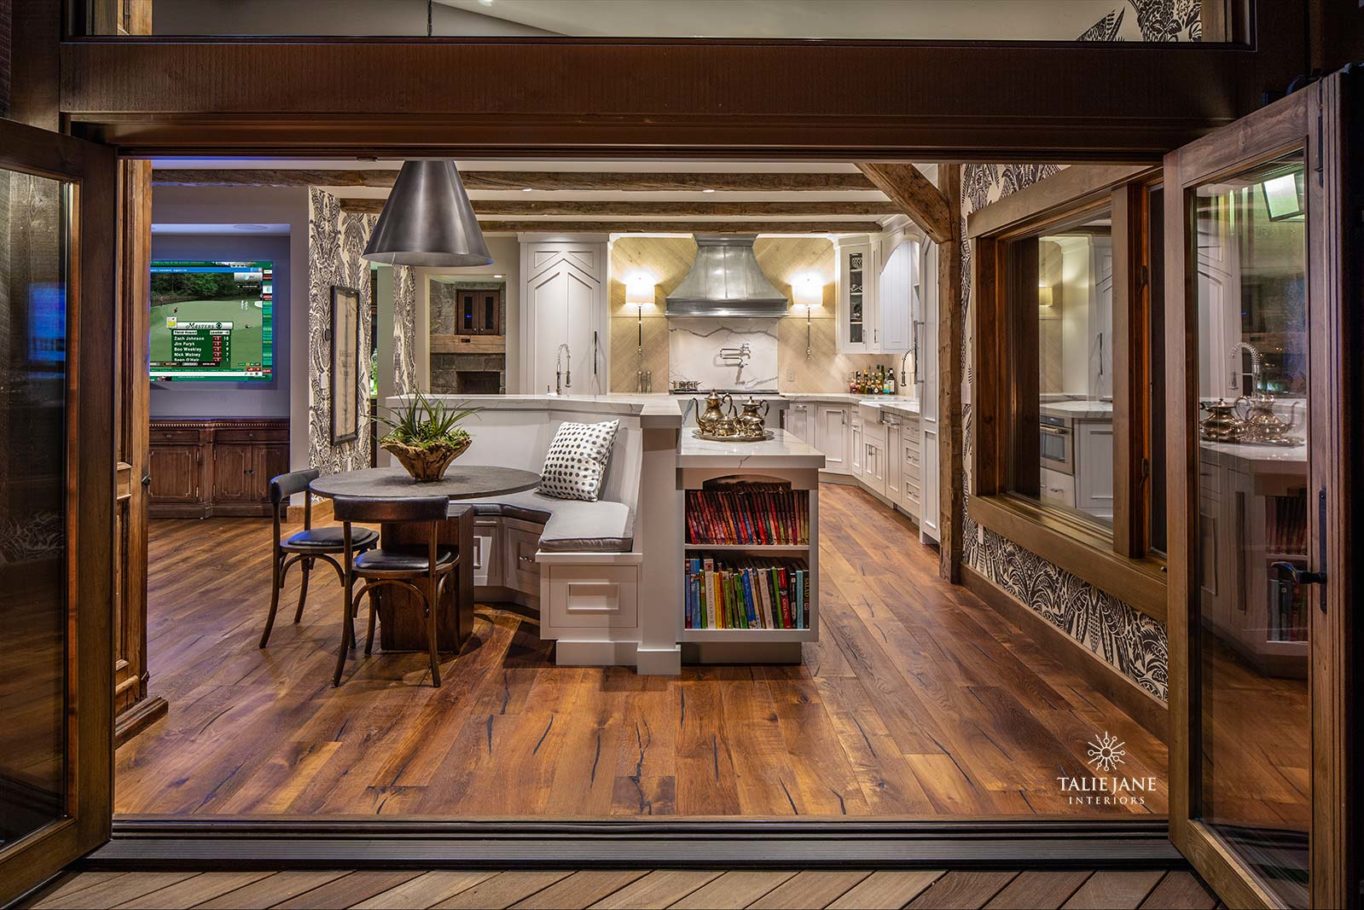 The view of an elaborate wood finish living room and kitchen